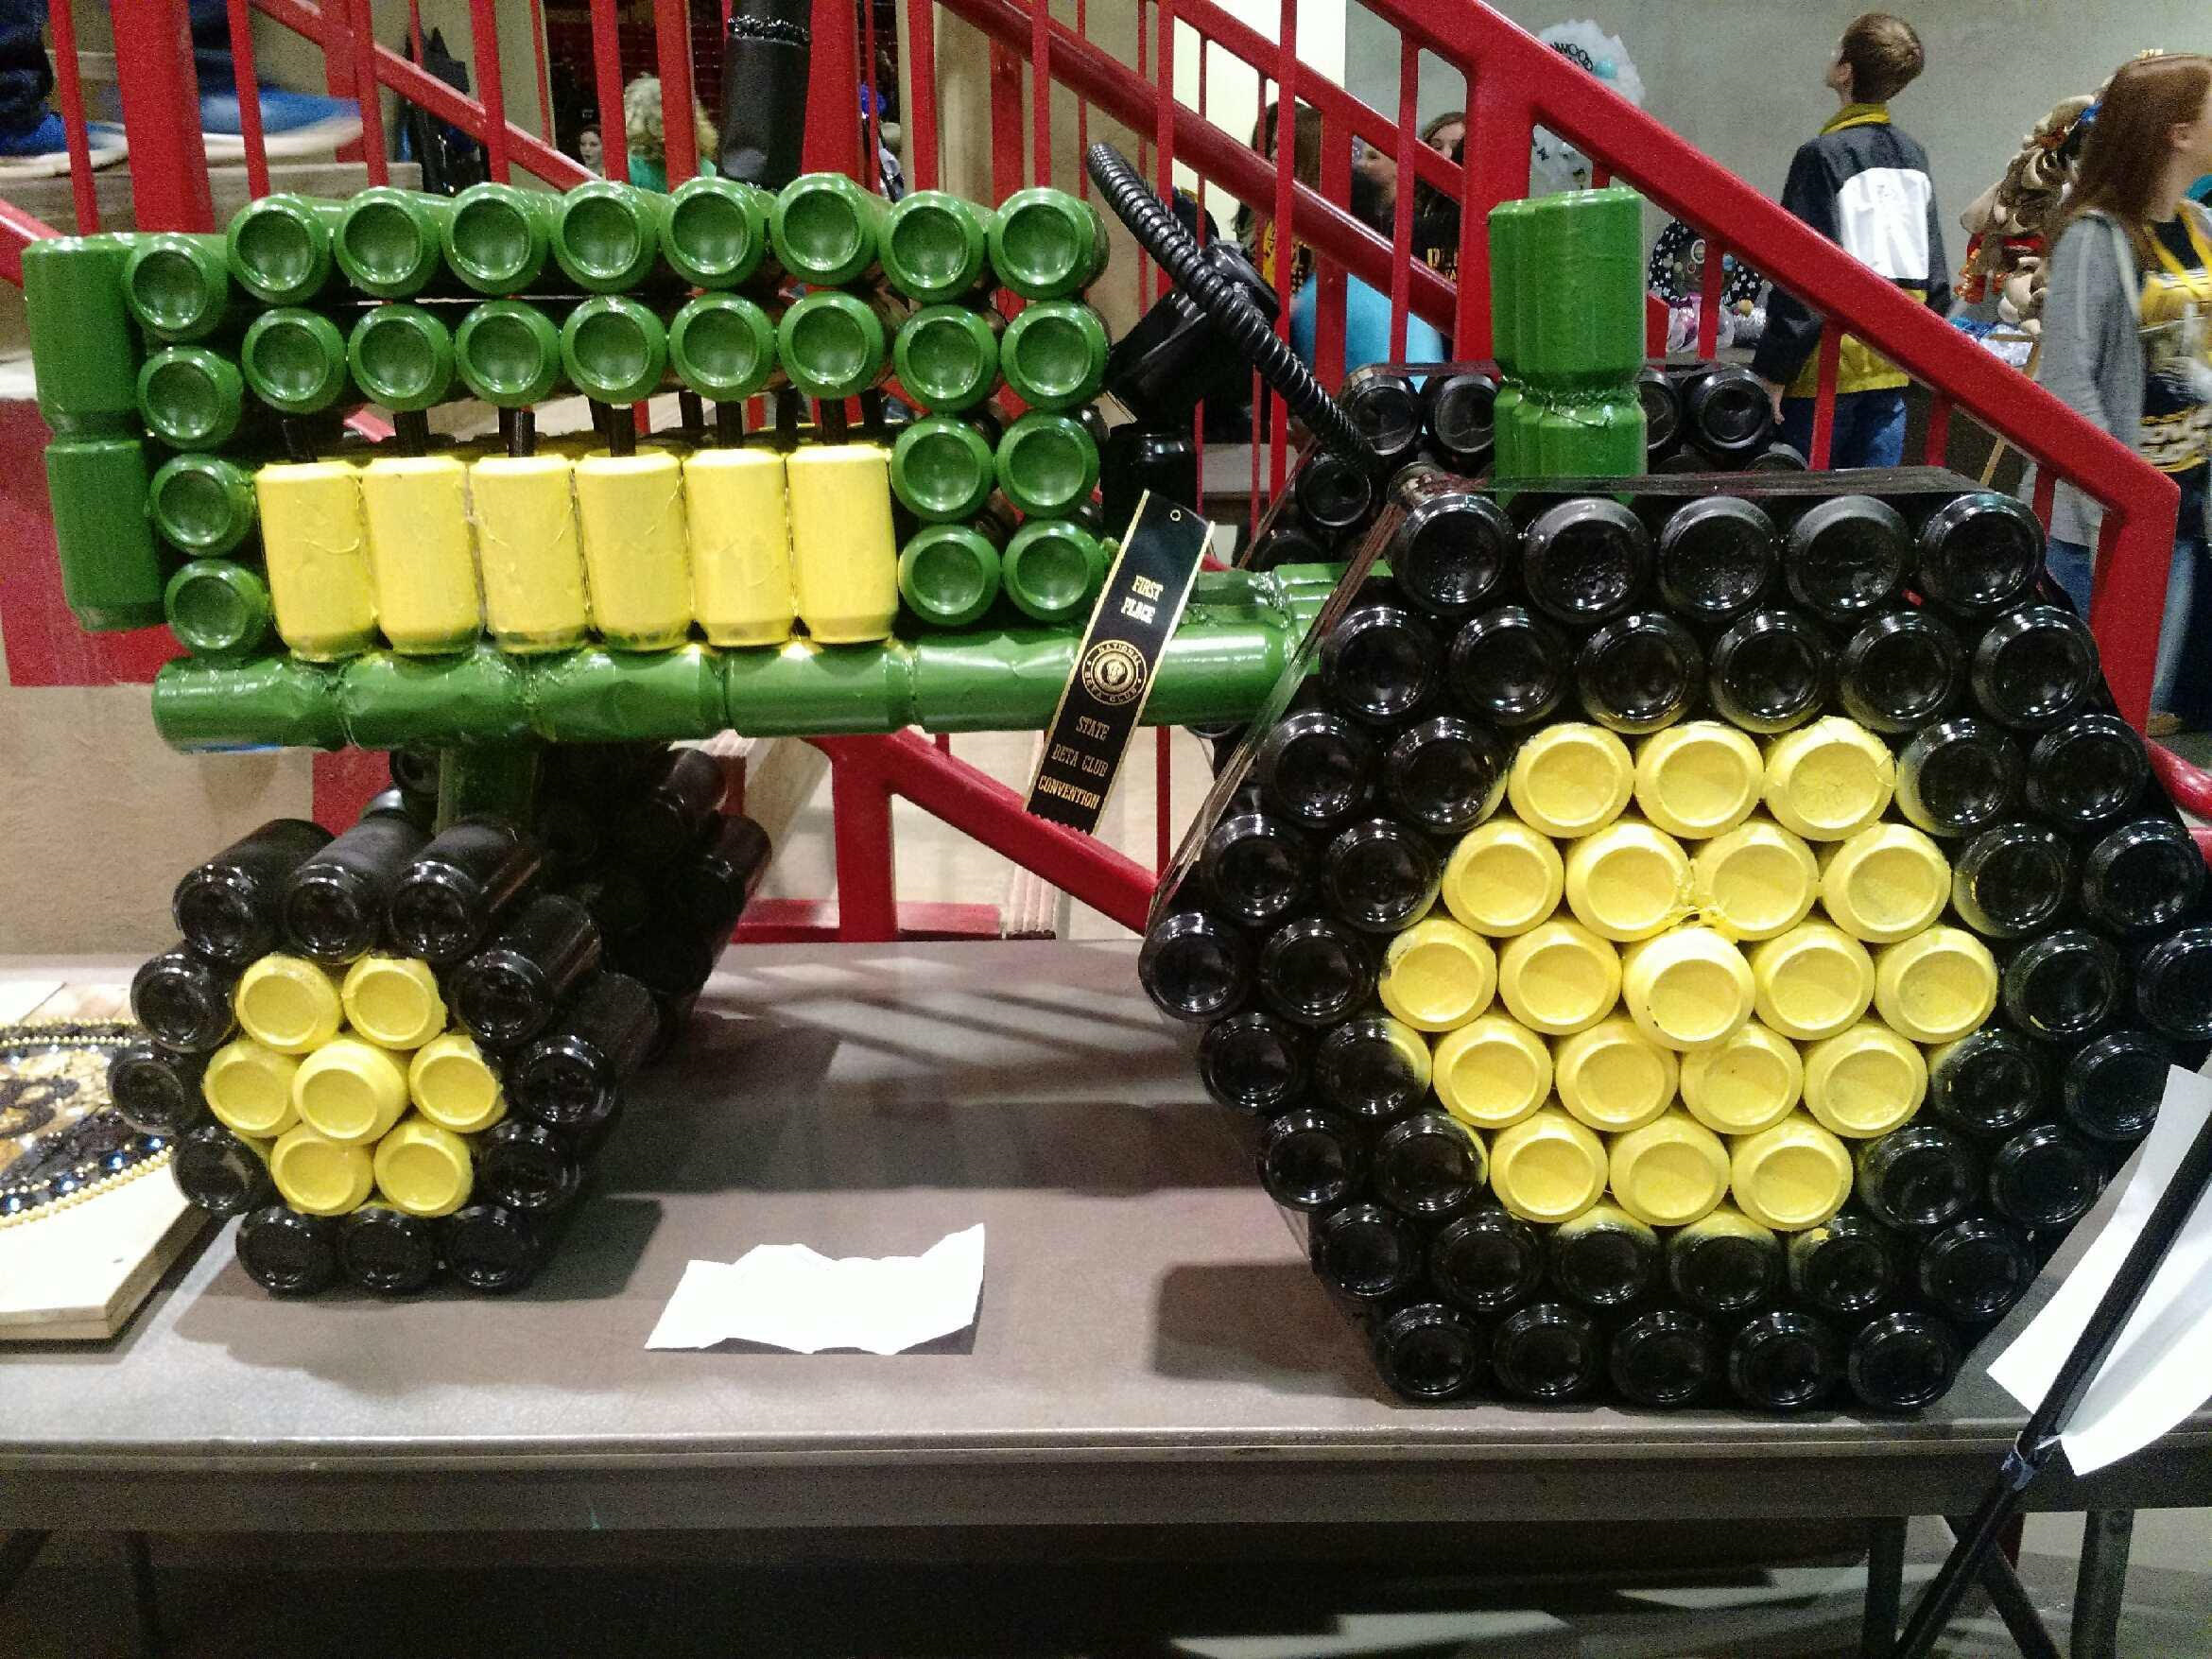 Image of a tractor made out of coke cans